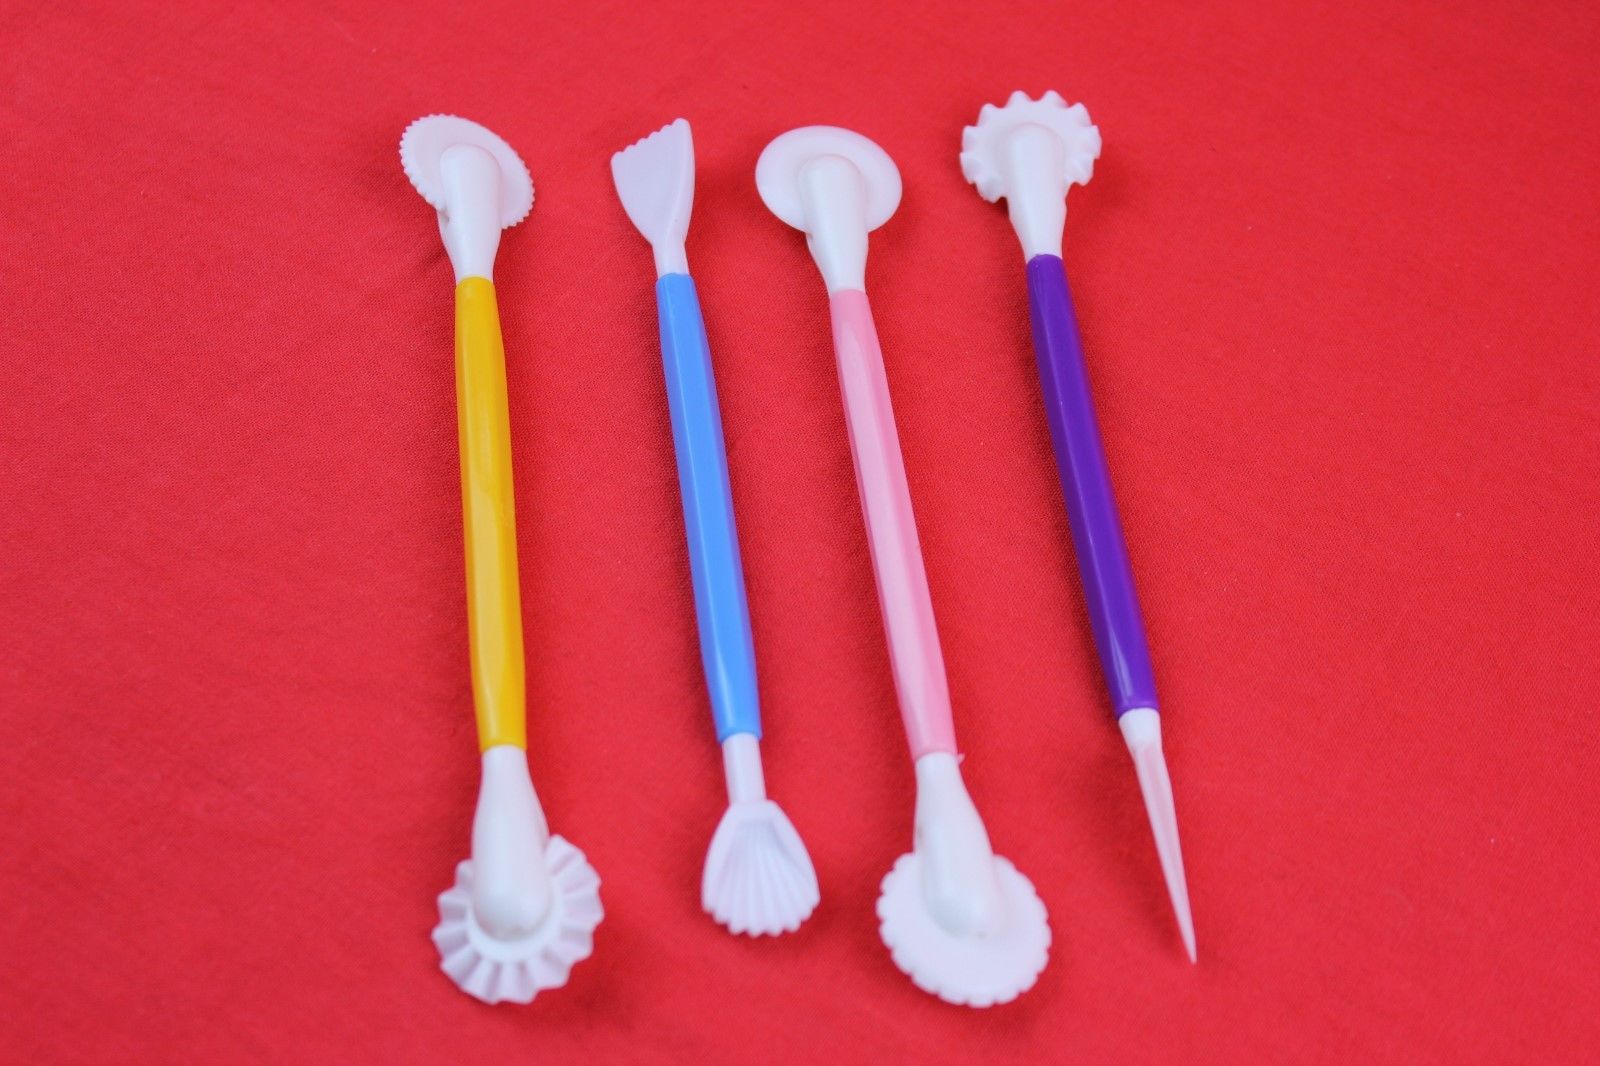 attachment-https://www.cupcakeaddicts.co.uk/wp-content/uploads/imported/7/4-CUPCAKE-DECORATING-EQUIPMENT-TOOLS-MODELLING-SET-SUGARCRAFT-CRAFT-ICING-323107198517-2.jpg